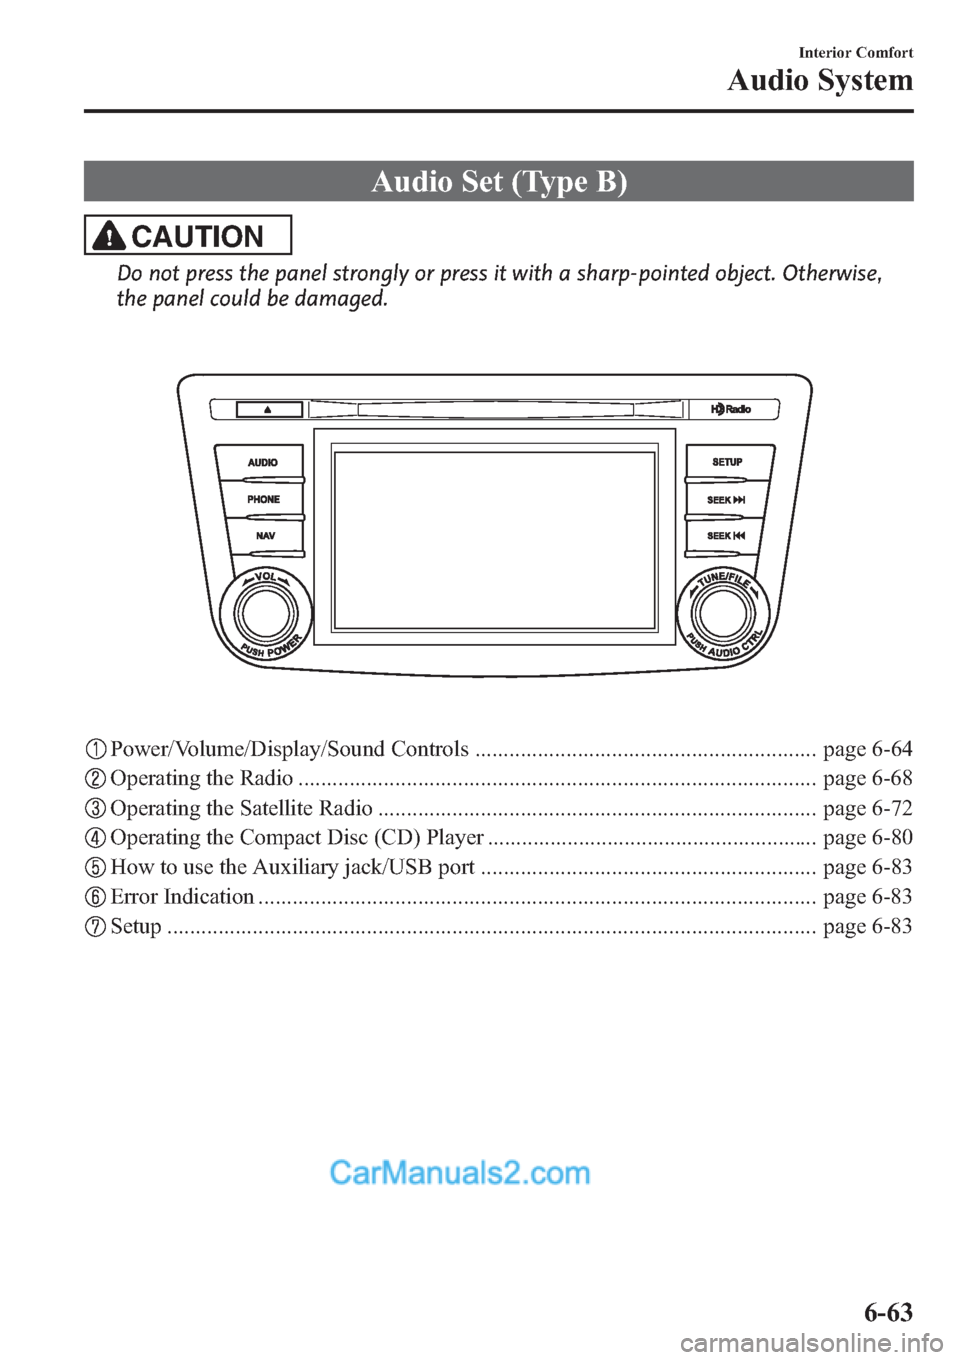 MAZDA MODEL MAZDASPEED 3 2013  Owners Manual (in English) Audio Set (Type B)
CAUTION
Do not press the panel strongly or press it with a sharp-pointed object. Otherwise,
the panel could be damaged.
Power/Volume/Display/Sound Controls .........................